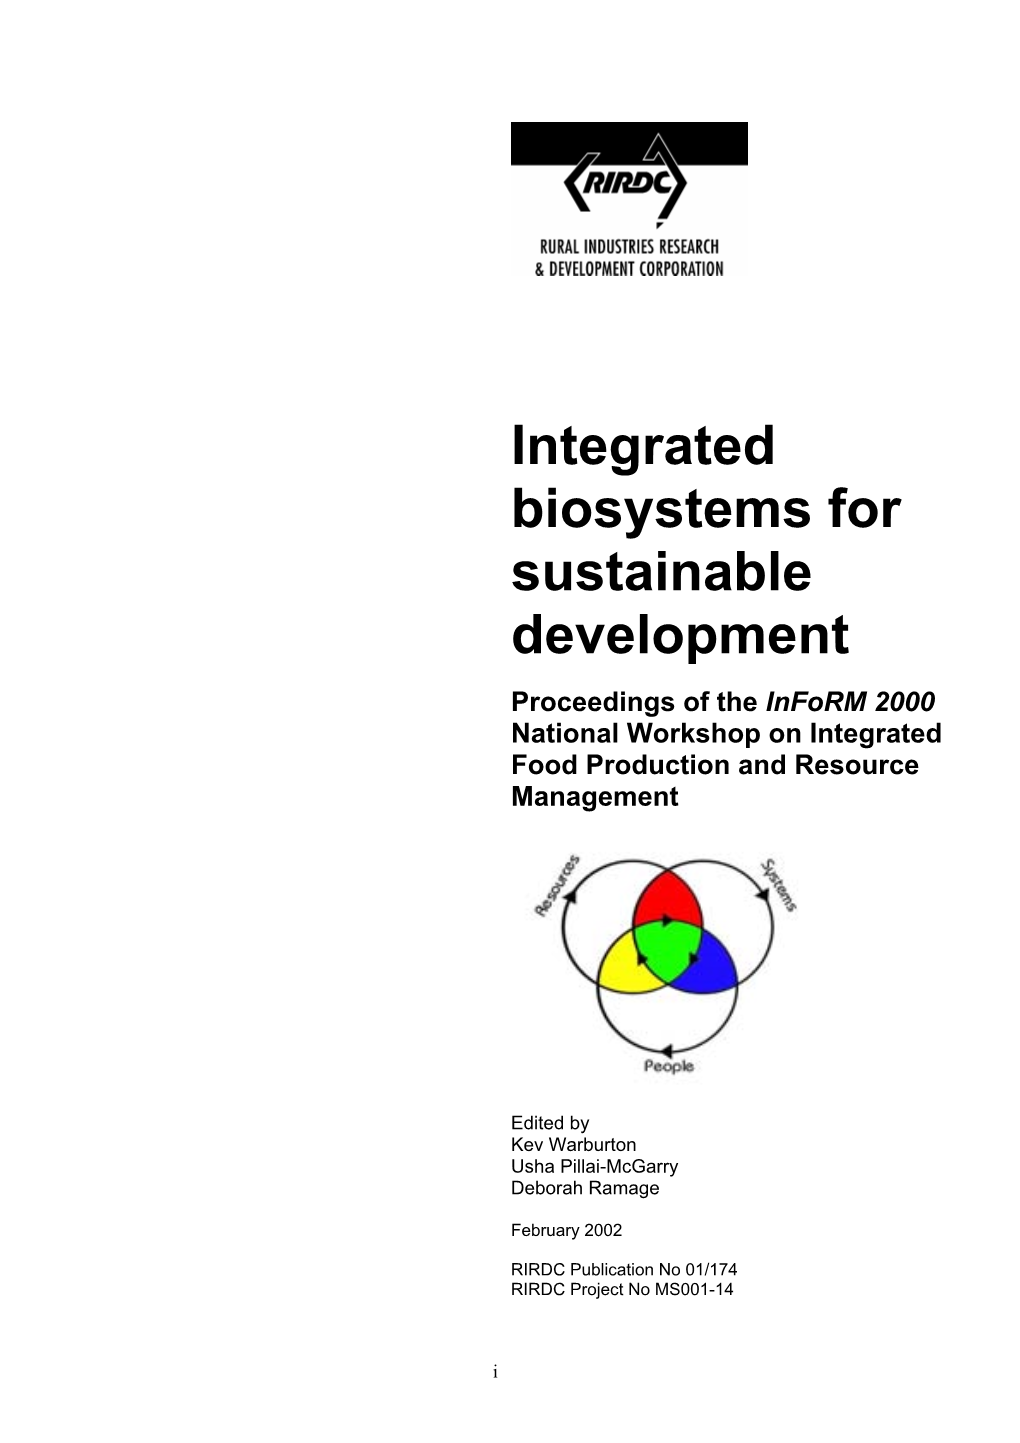 Integrated Biosystems for Sustainable Development Proceedings of the Inform 2000 National Workshop on Integrated Food Production and Resource Management